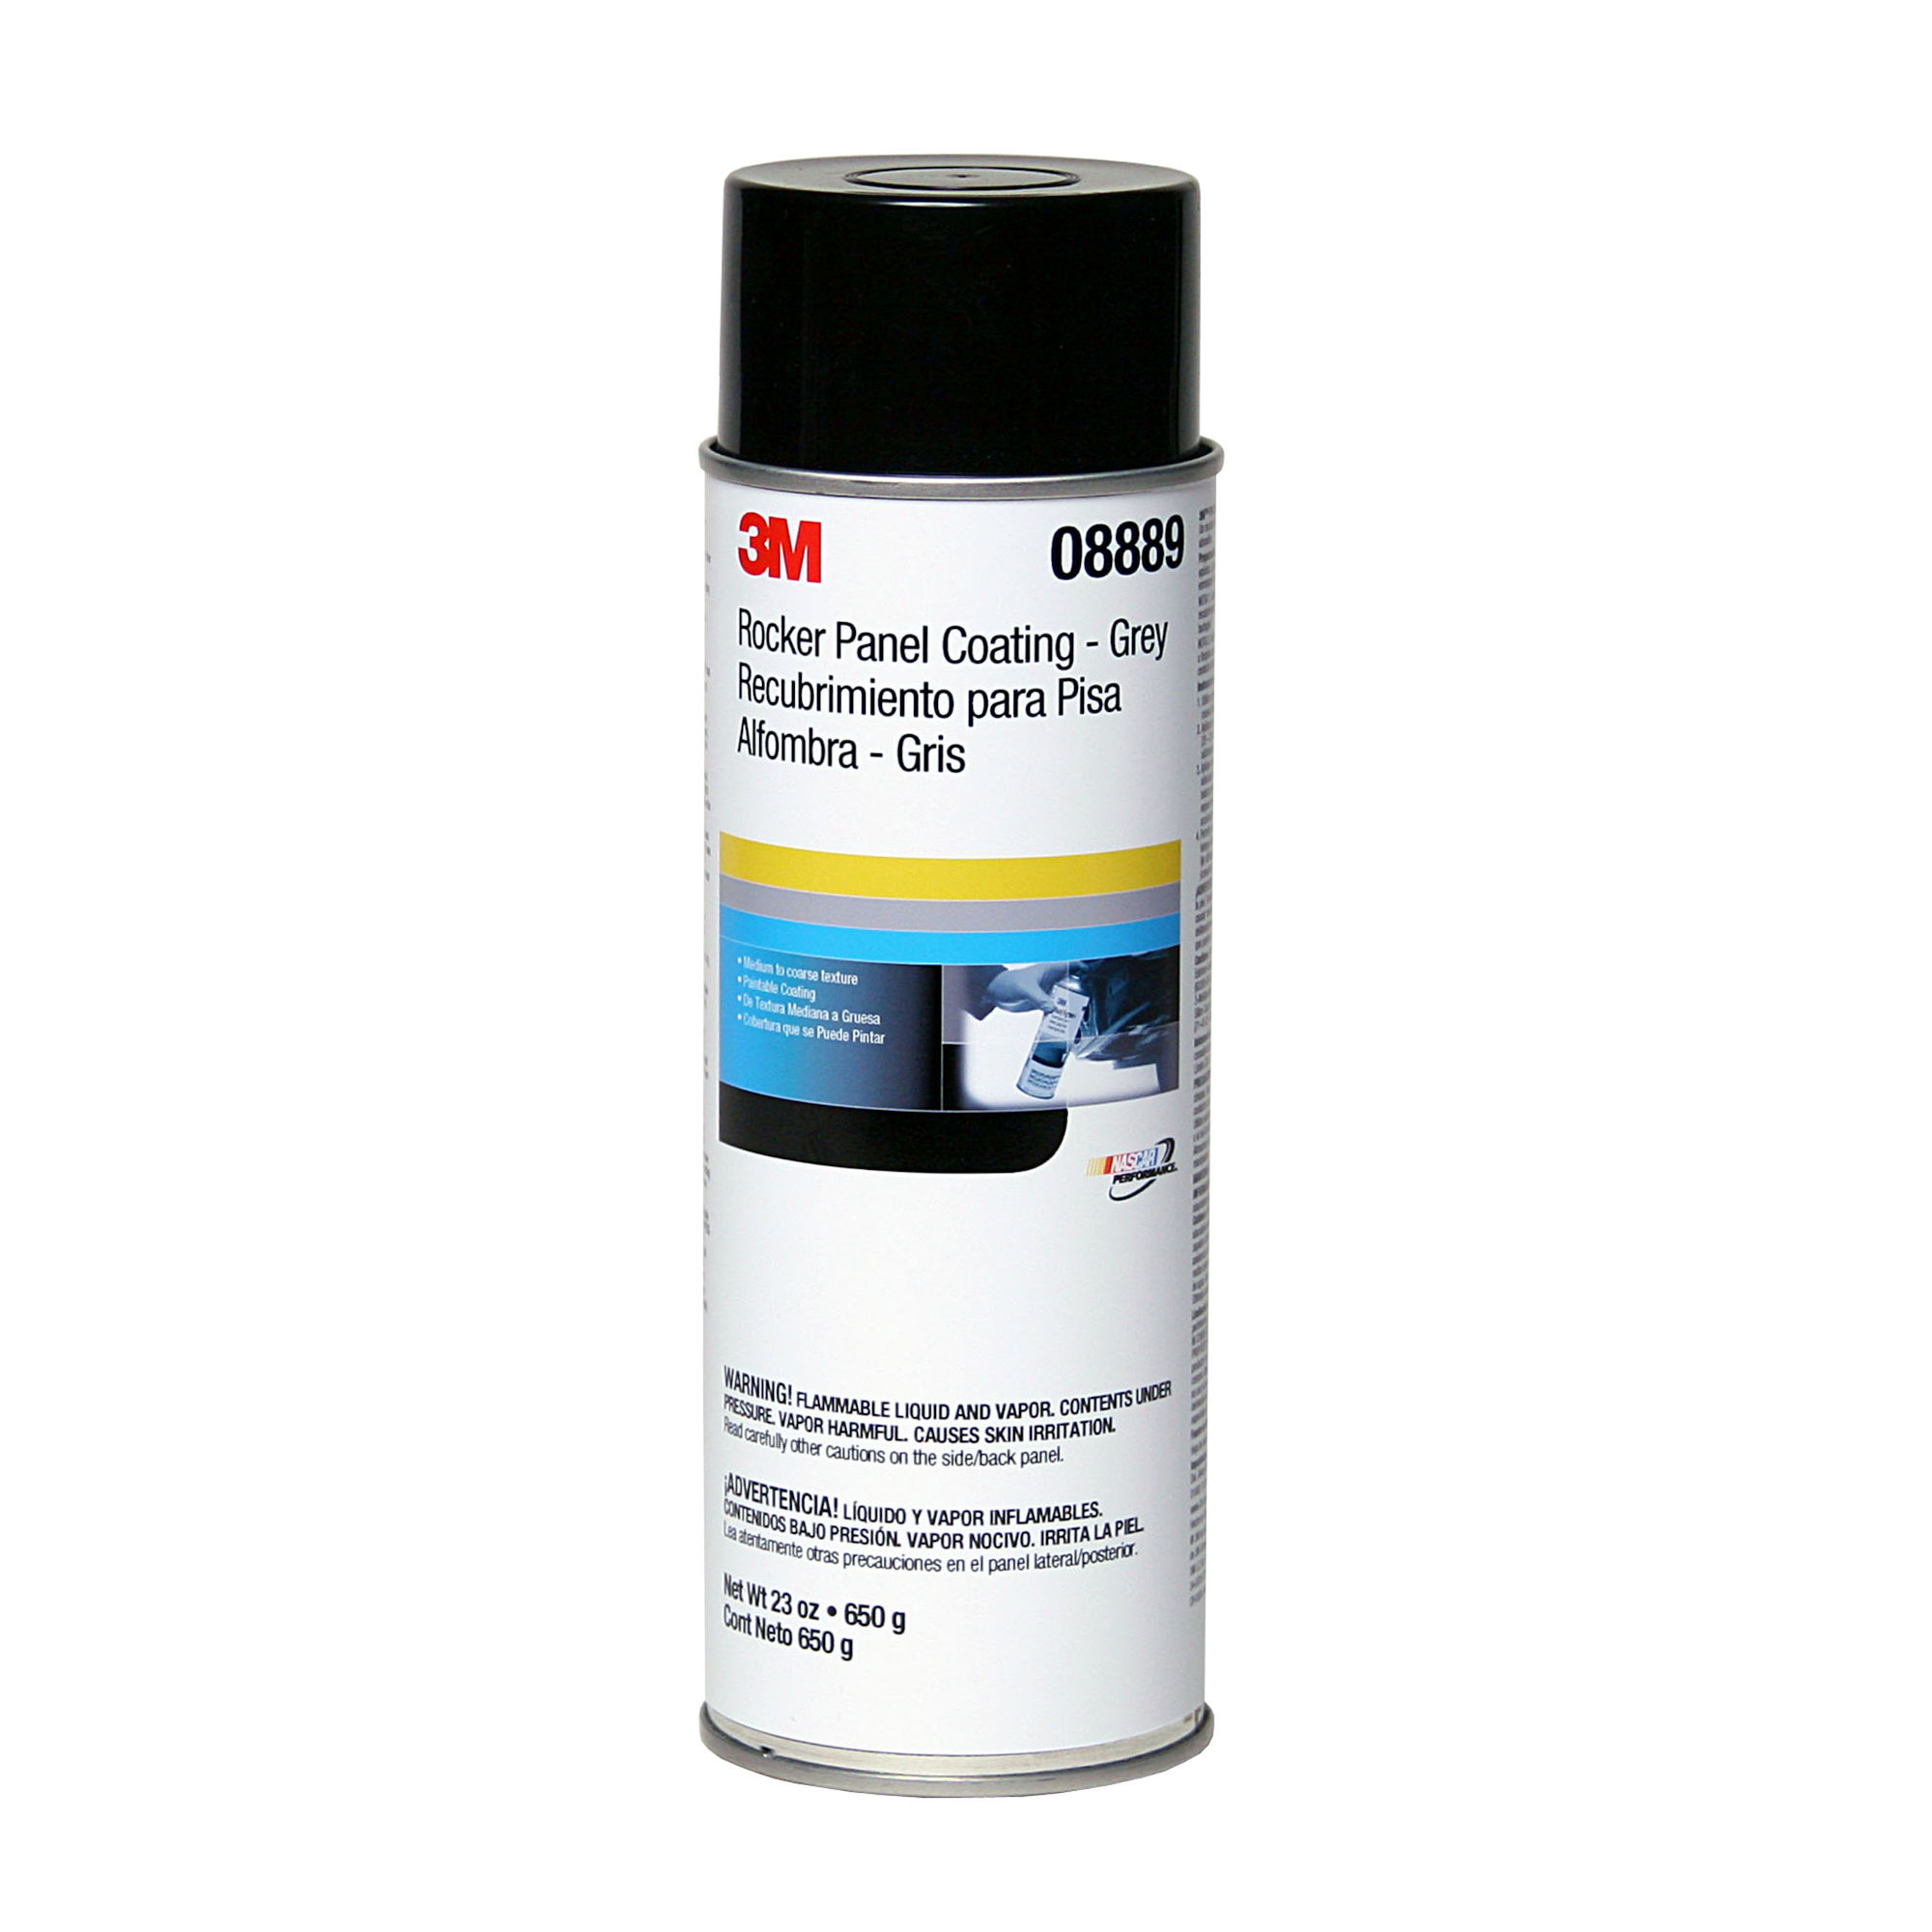 Reflective paint for concrete surfaces from Noxton. Buy Noxton for Concrete  Light Reflective paint